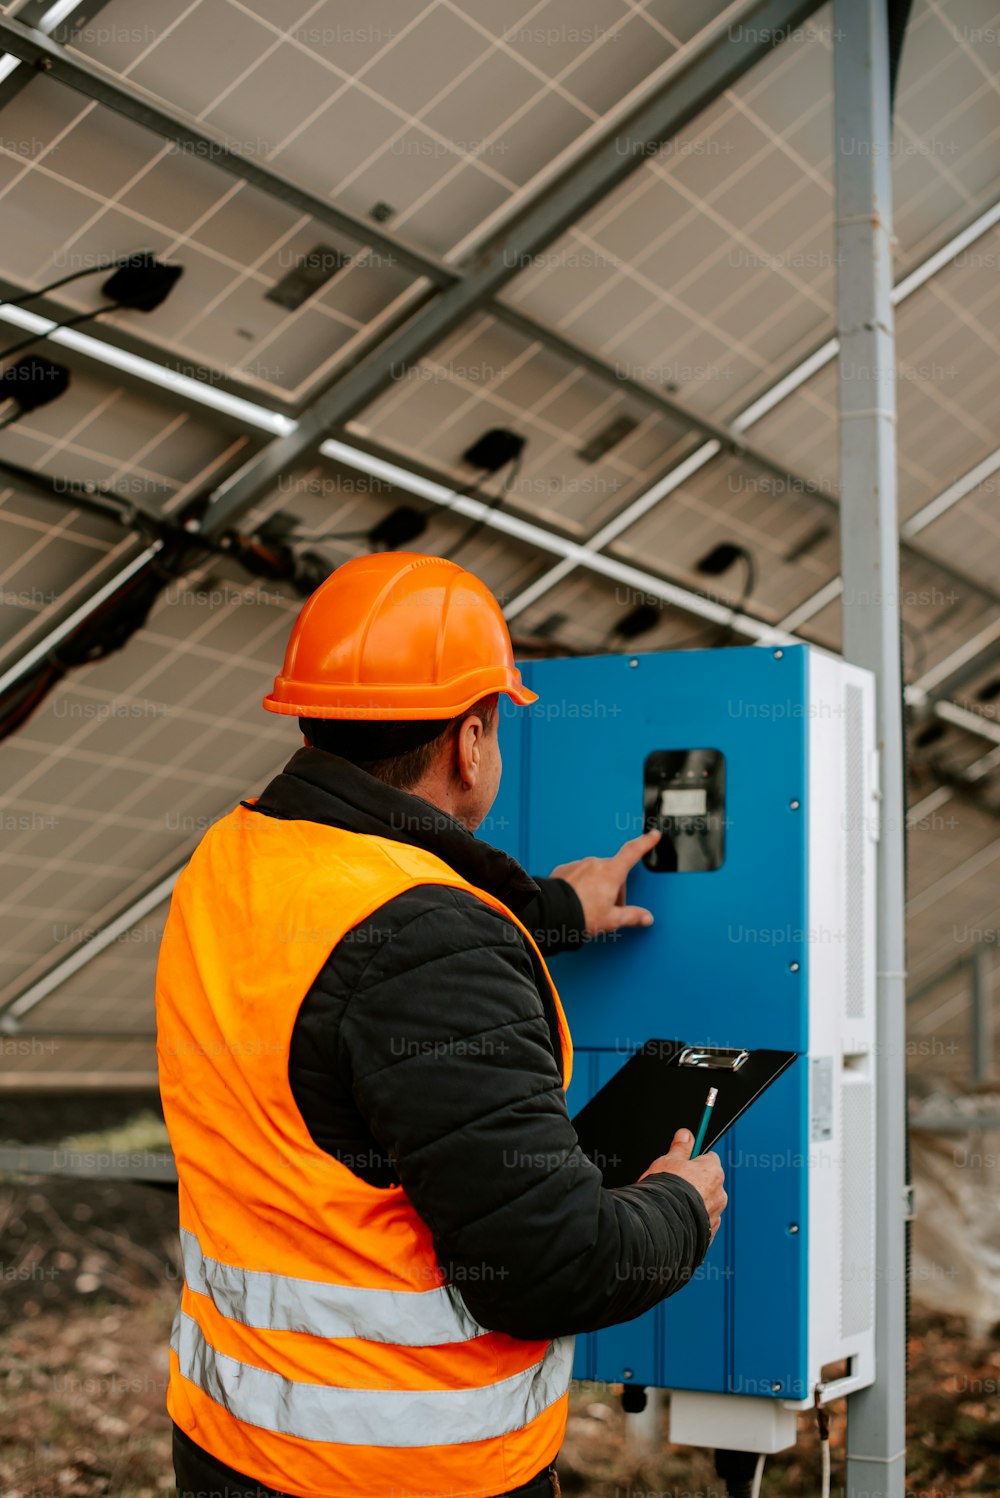 a man in an orange safety vest is looking at a blue box